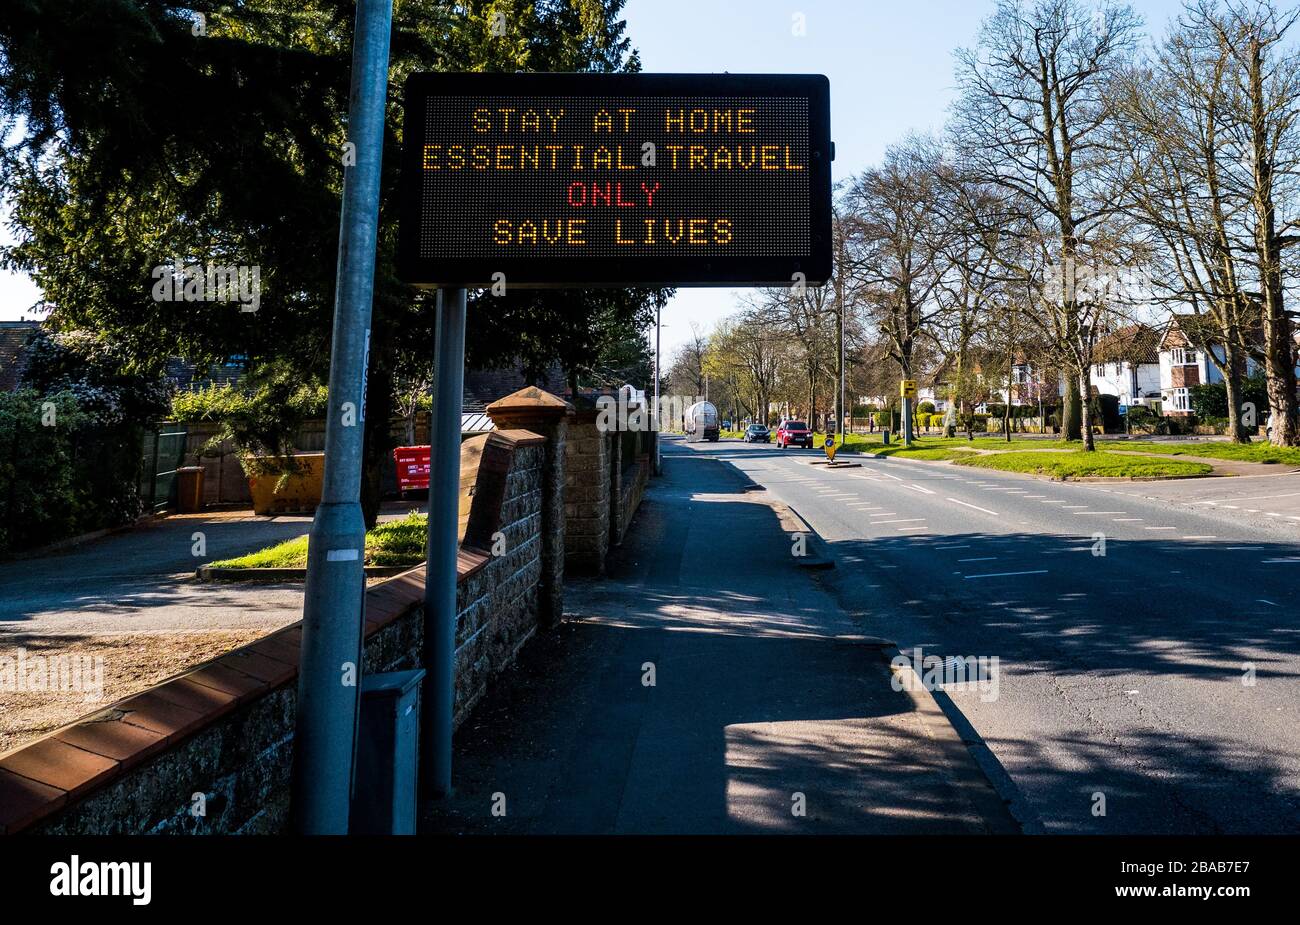 Sign, Stay at Home, Essential Travel Only, Save Lives, Traffic Sign, Repurposed for Public Health Warning, Caversham, Reading, Berkshire, England, UK. Stock Photo